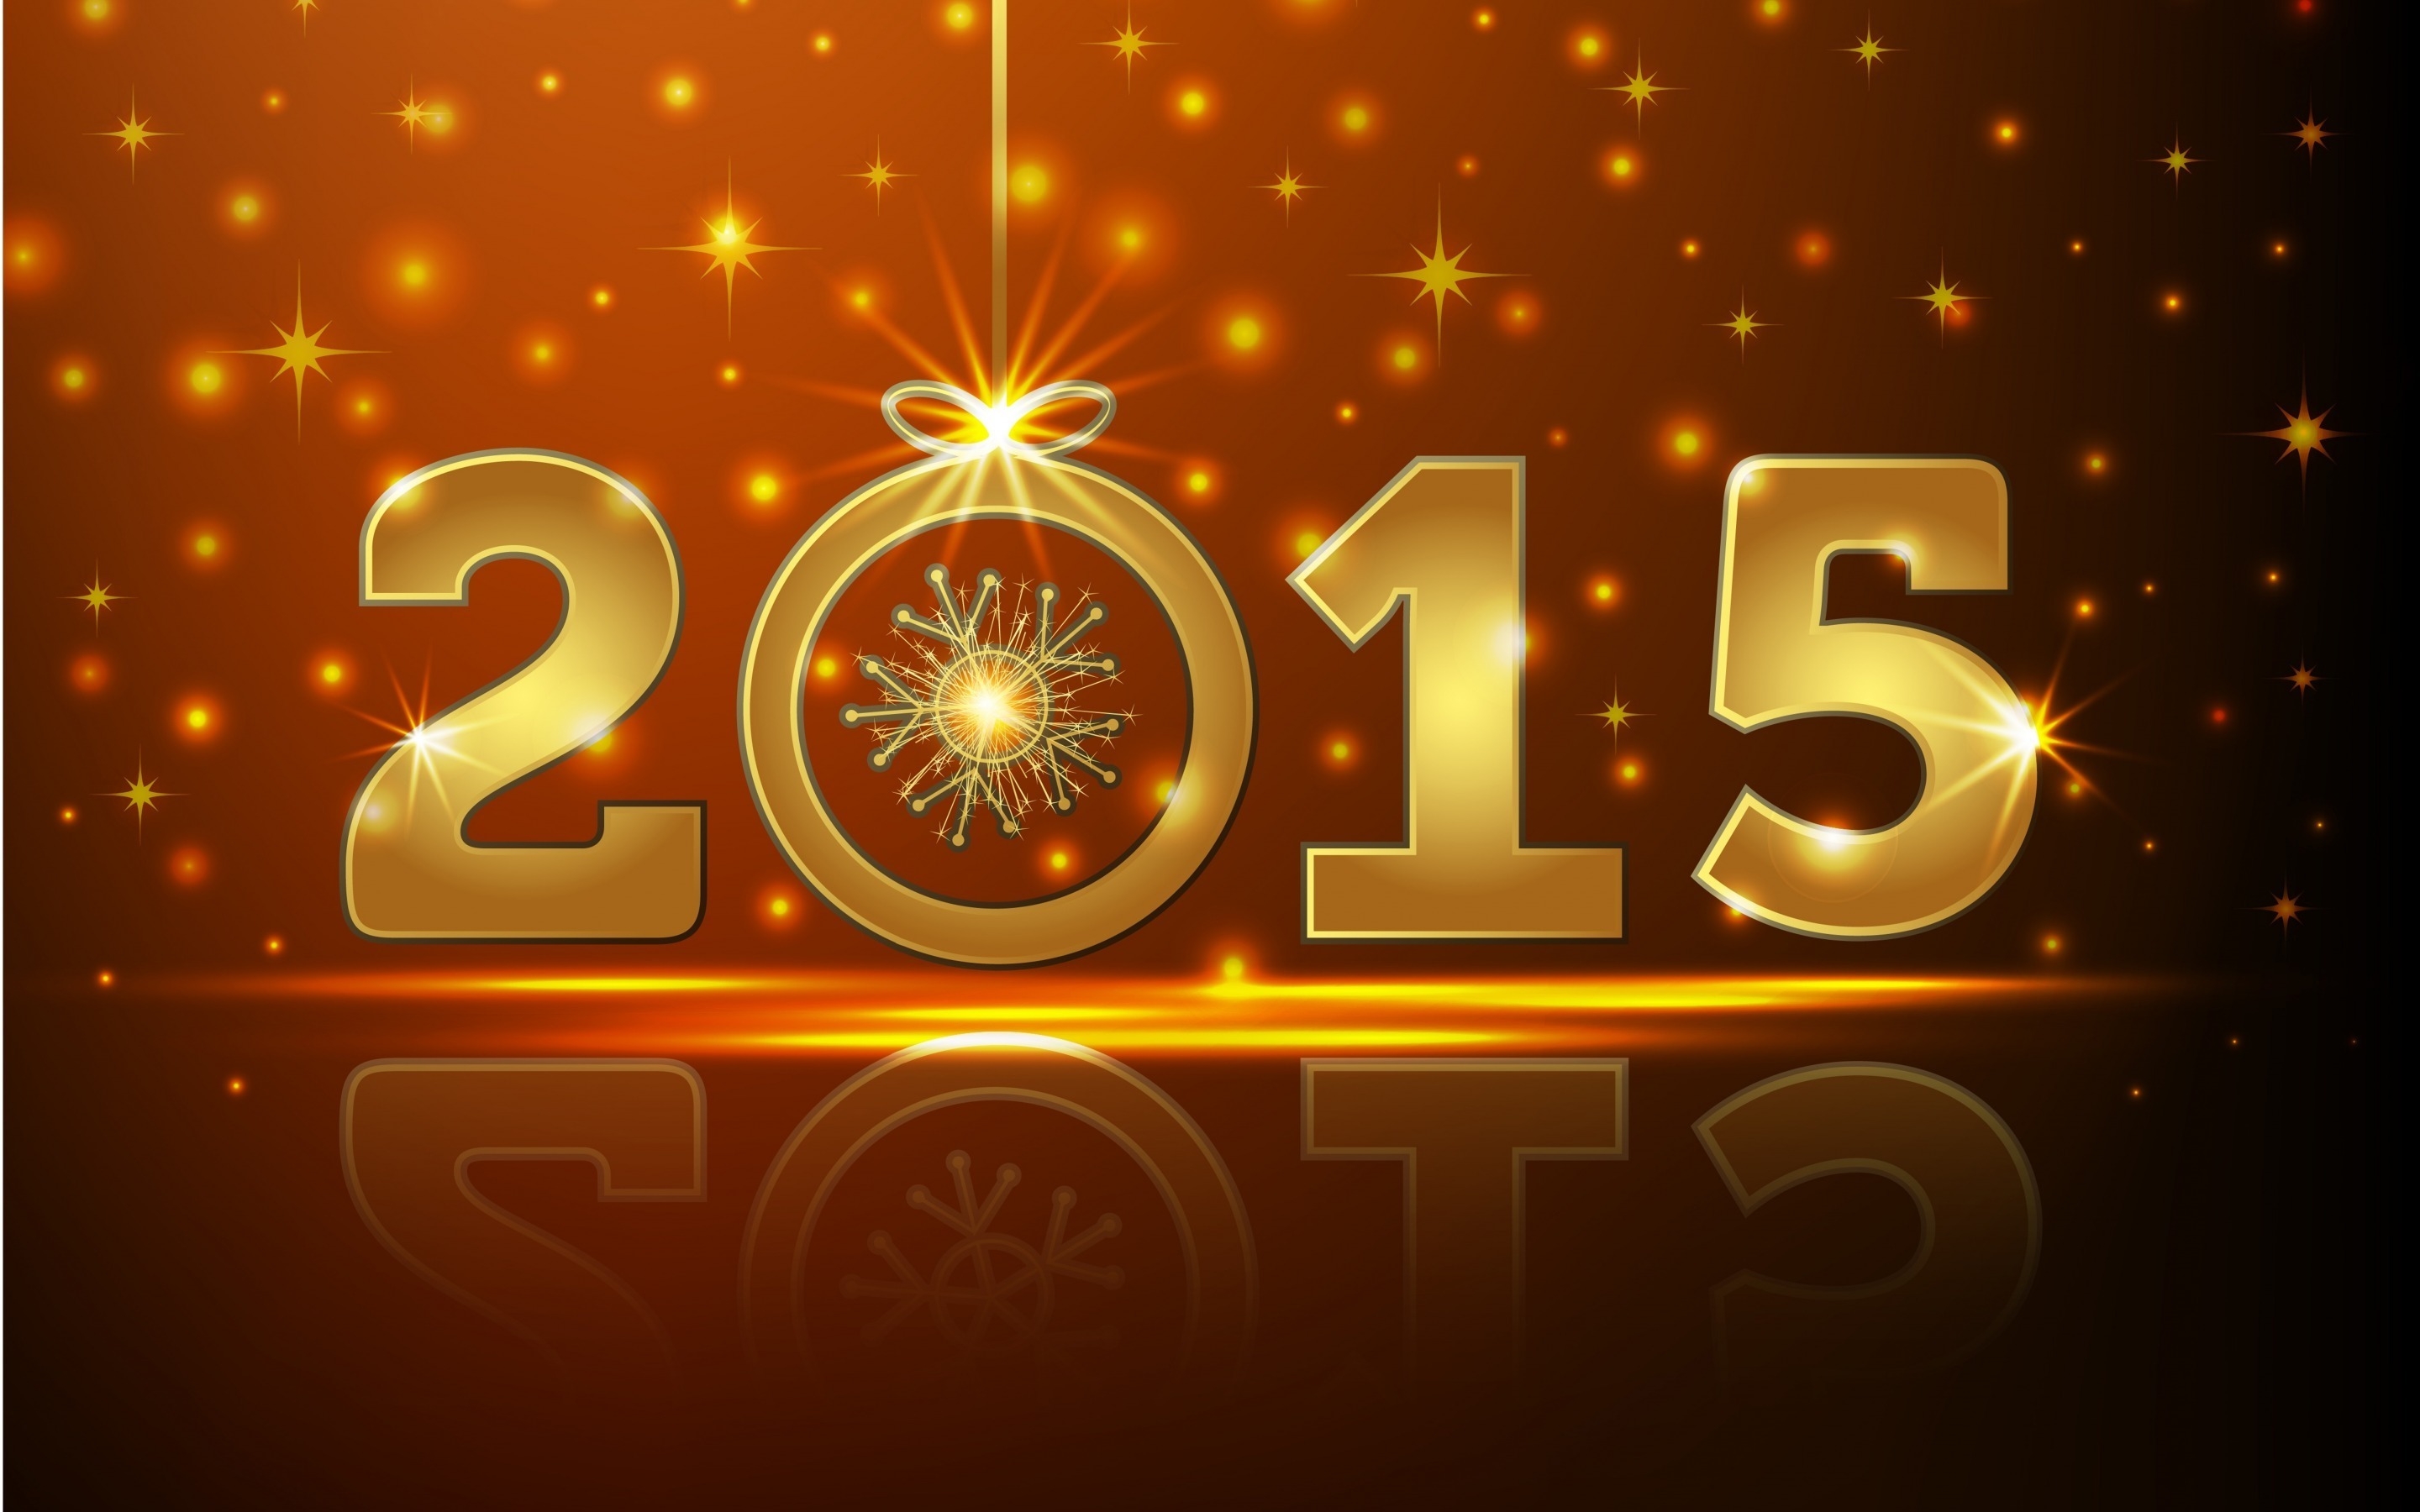 2015 New Year for 2880 x 1800 Retina Display resolution